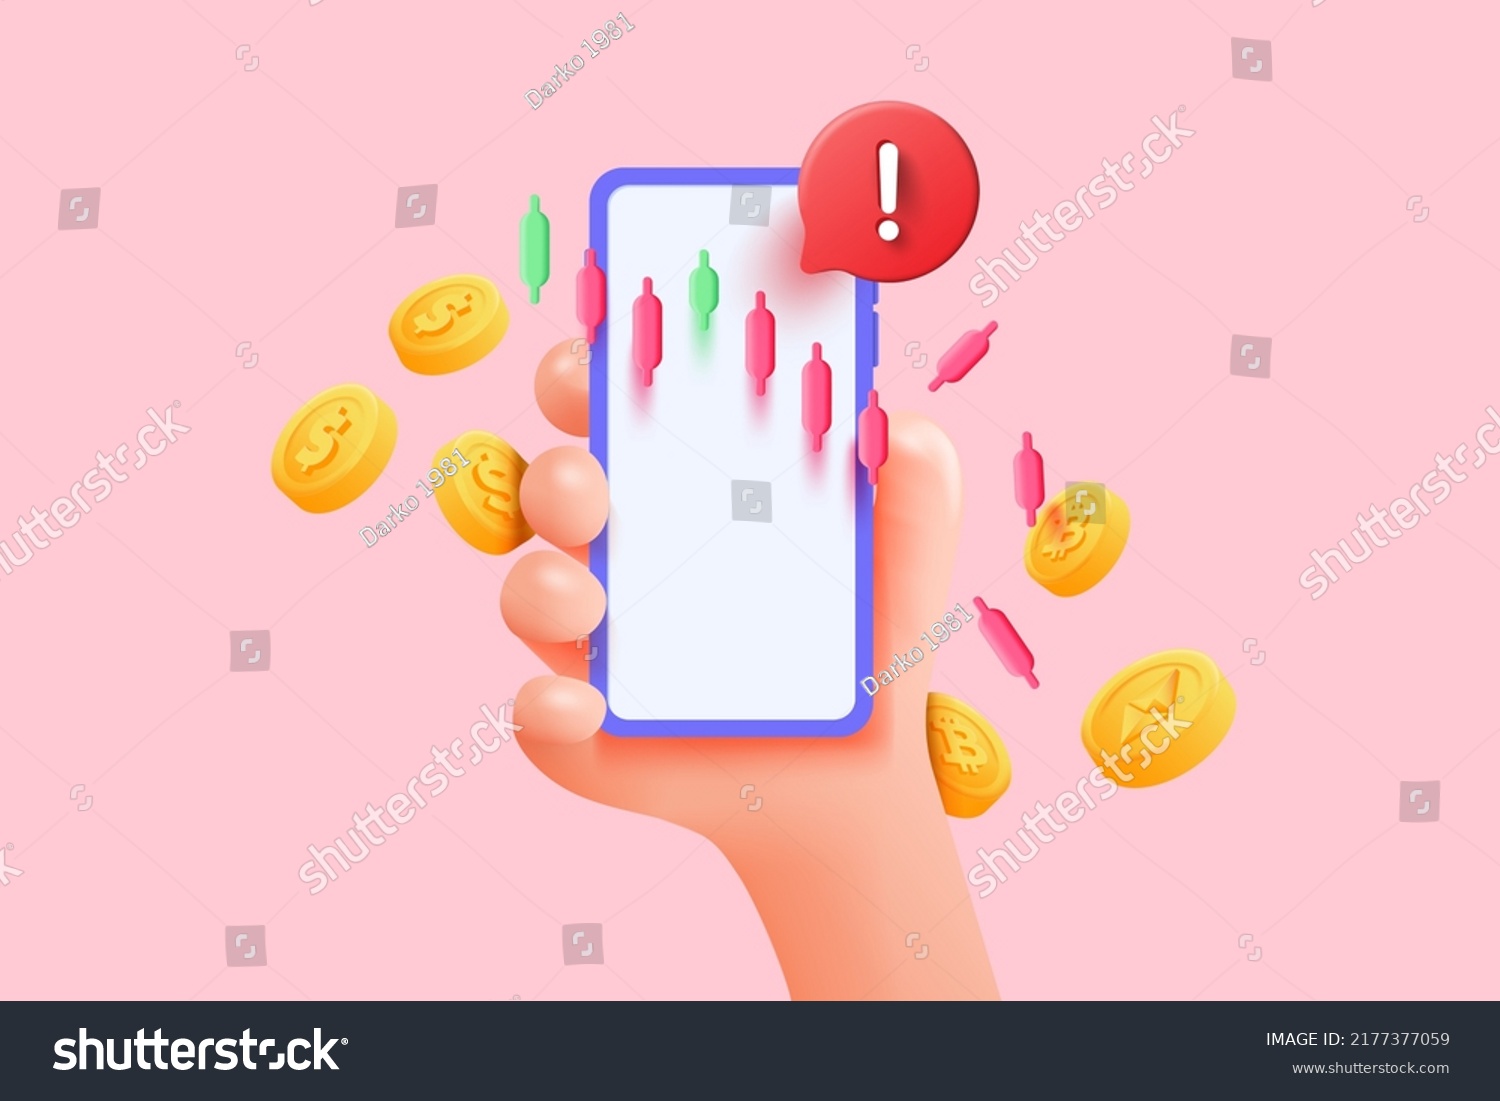 SVG of 3D Illustration downtrend candle sticks with warning on mobile phone holding hand. Downtrend stock and crypto currency investment situation concept. 3d Vector Illustration svg